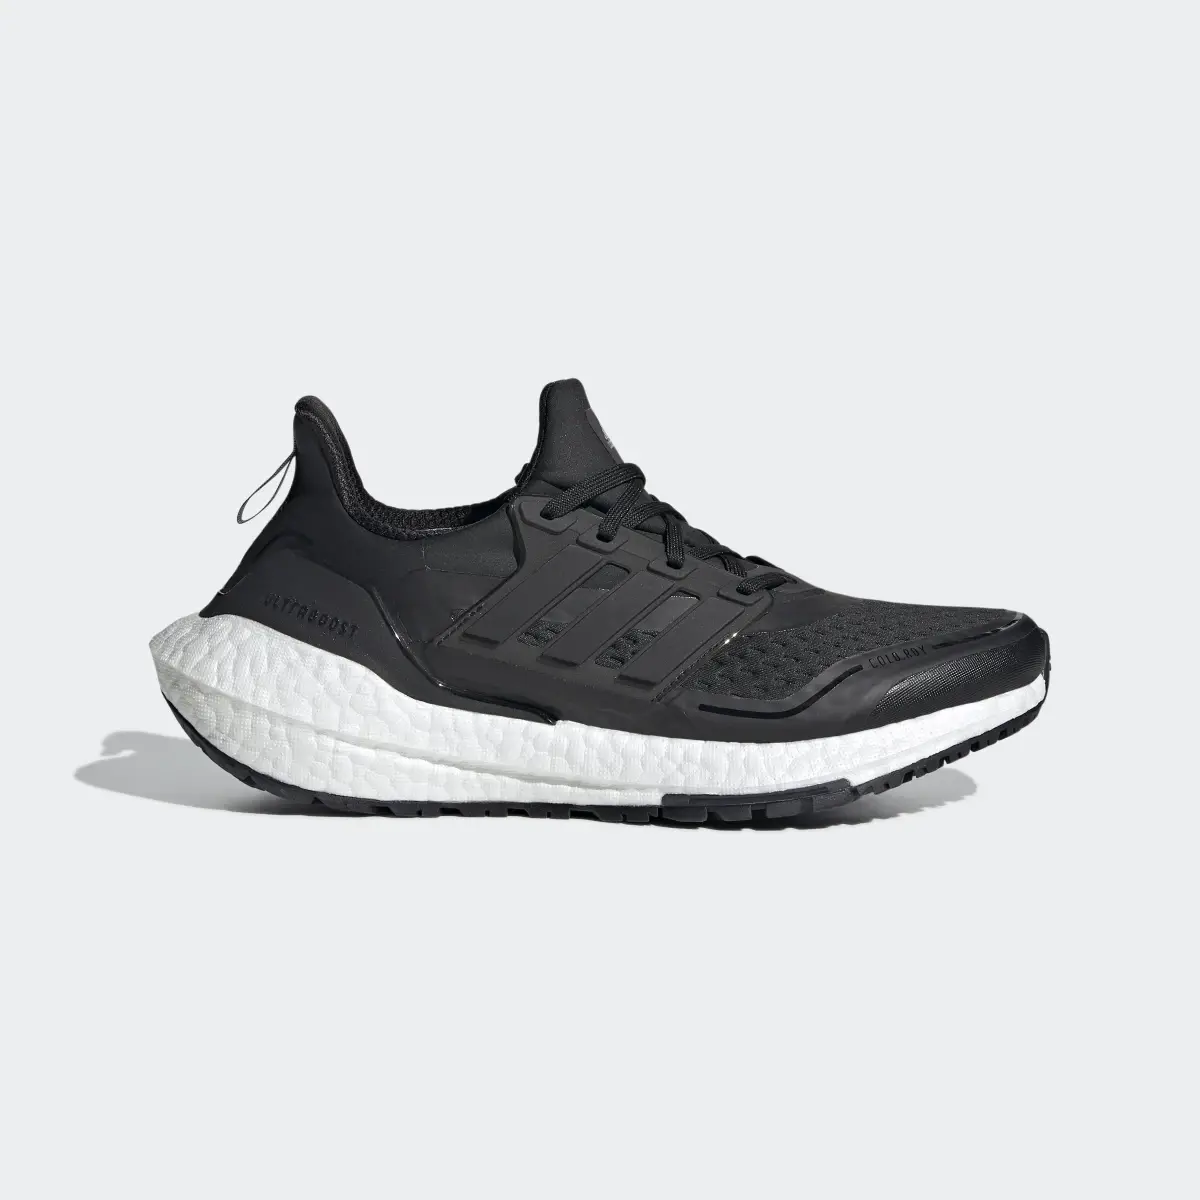 Adidas Ultraboost 21 COLD.RDY Shoes. 2